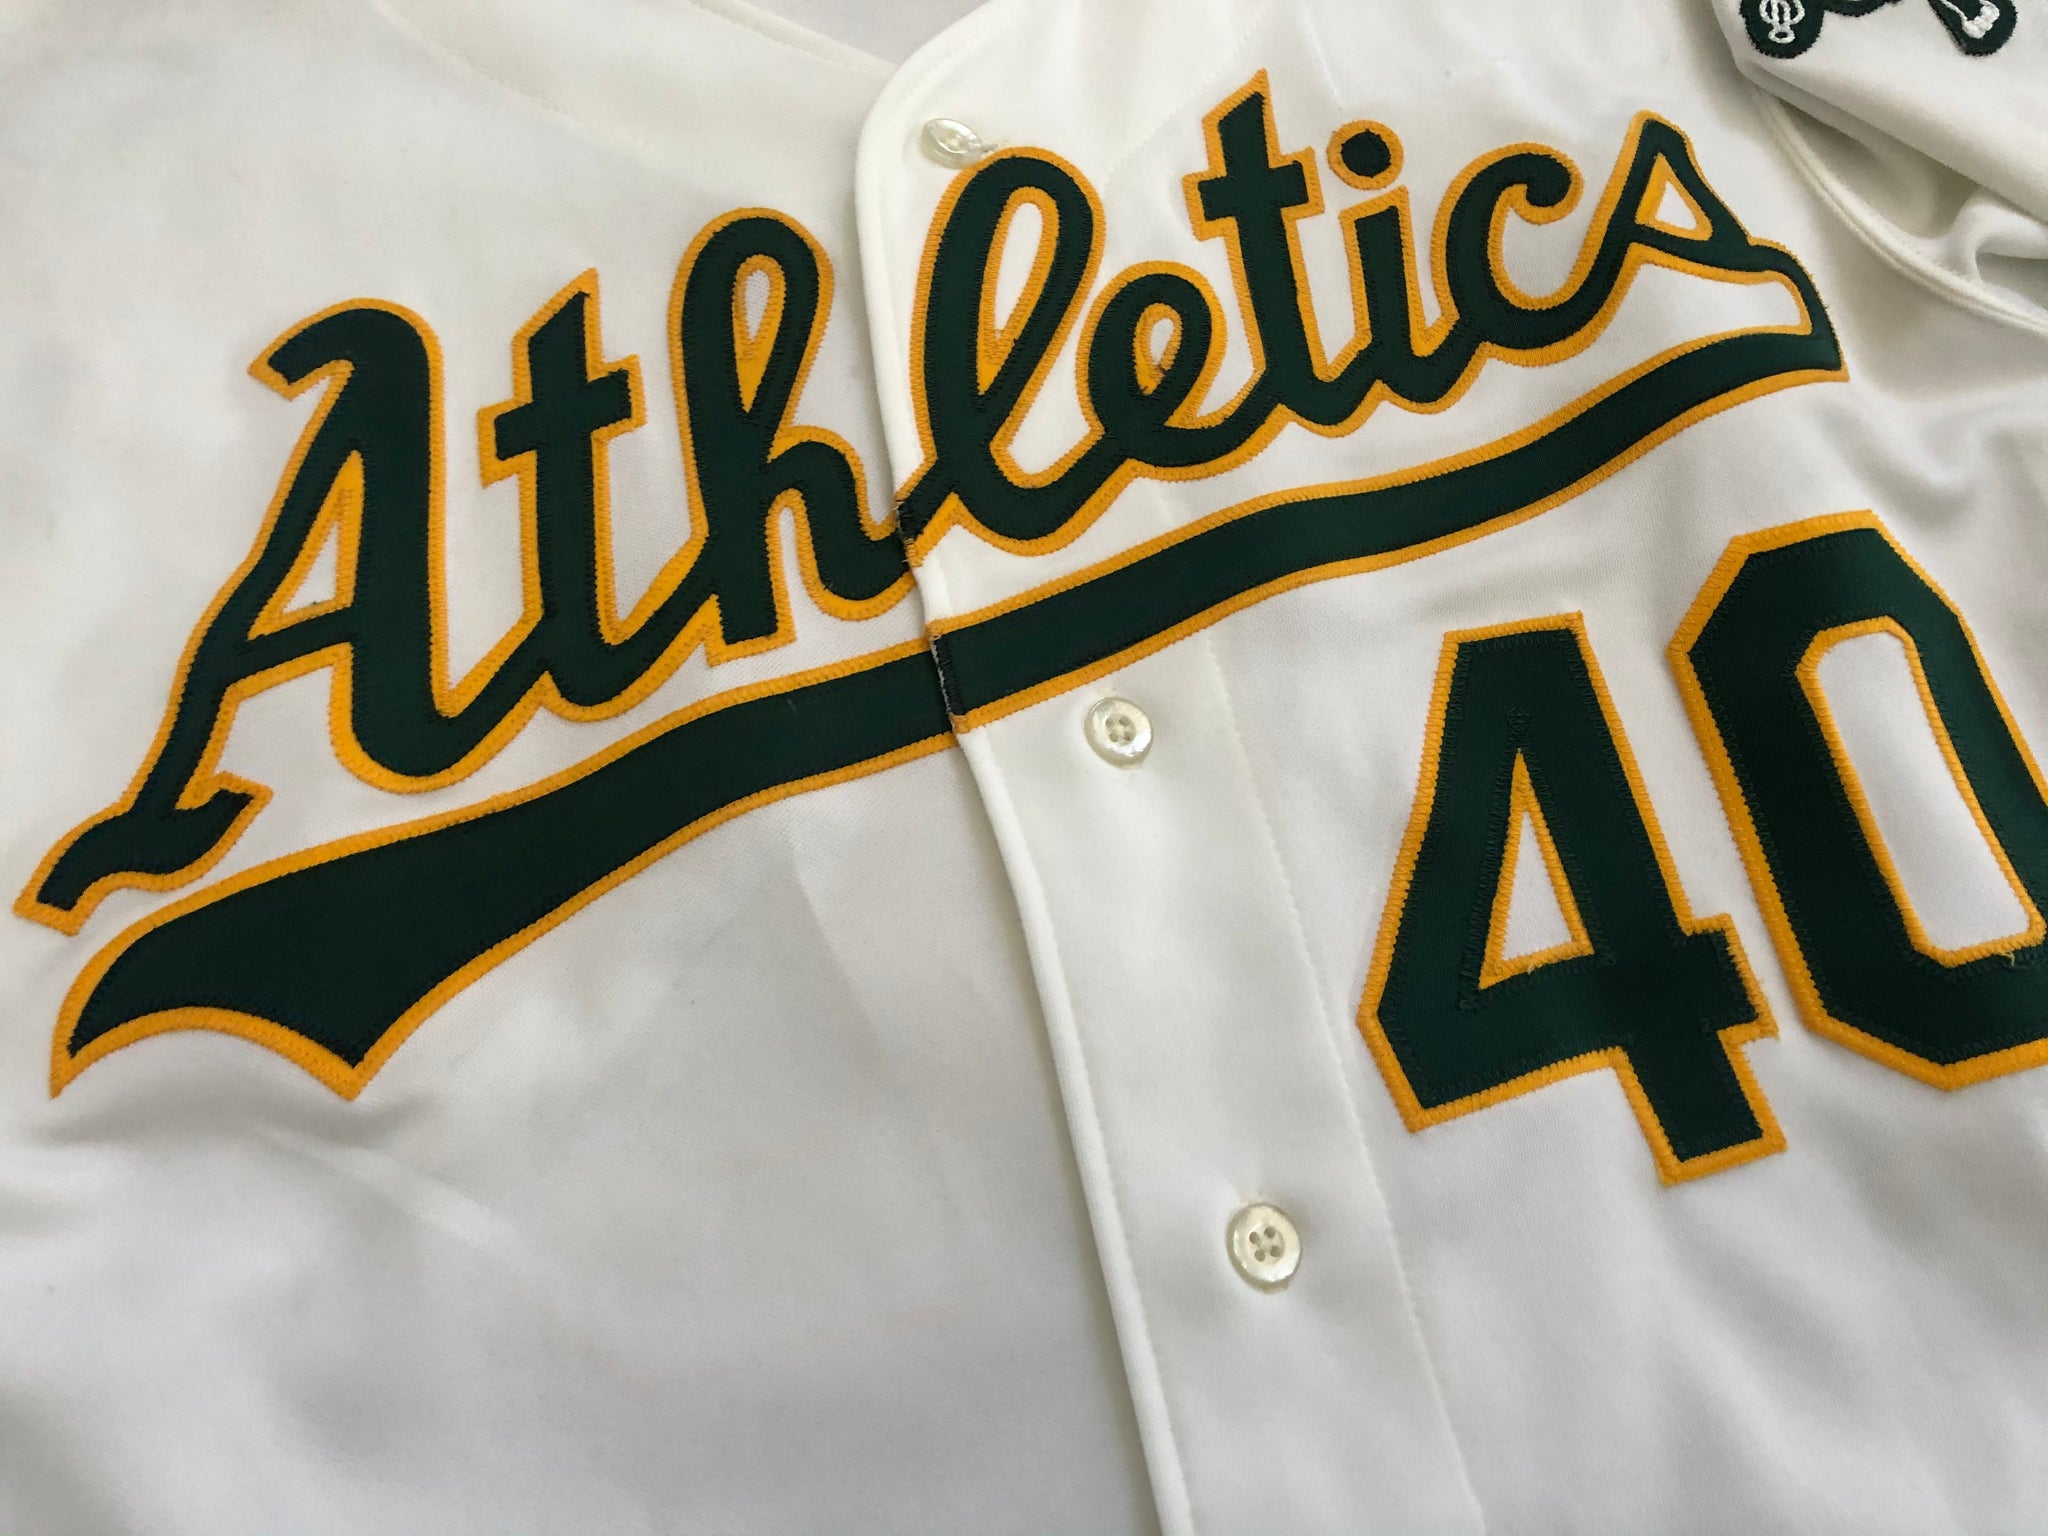 Vintage Oakland Athletics Black Majestic Jersey • Large New With Tags A’s